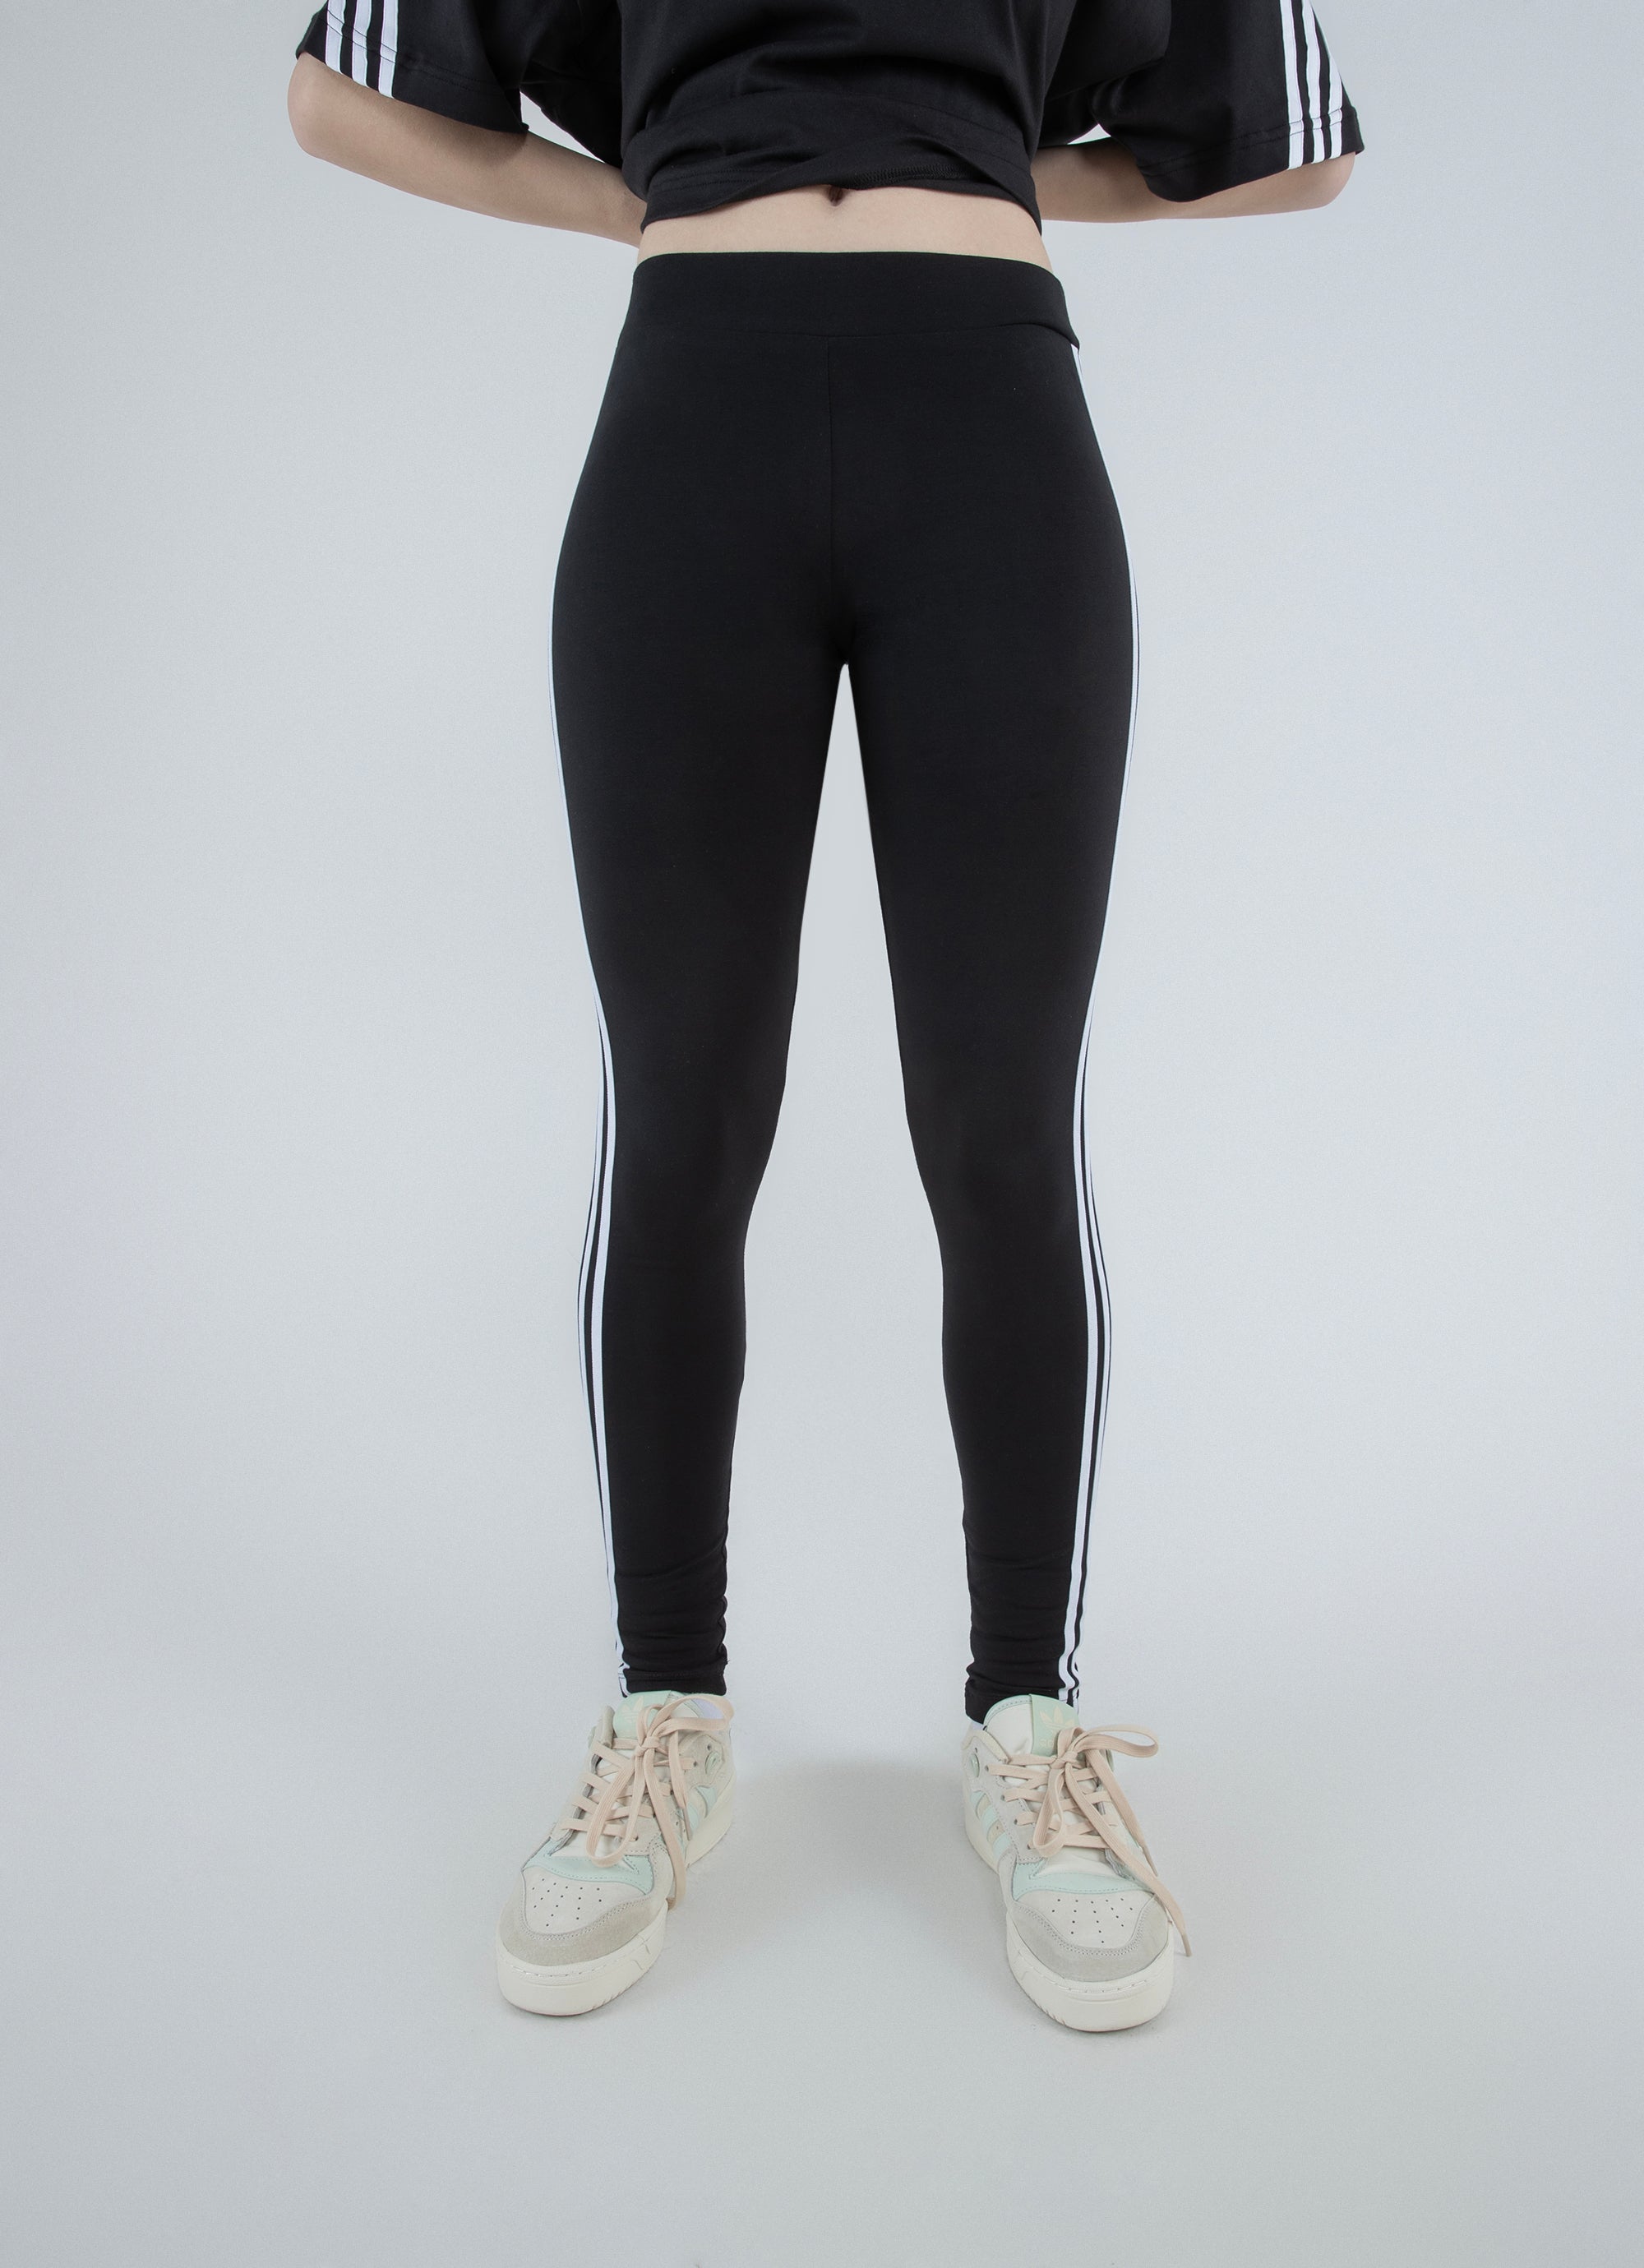 adidas Training Aeroknit 7/8 leggings with branded waistband in blue | ASOS